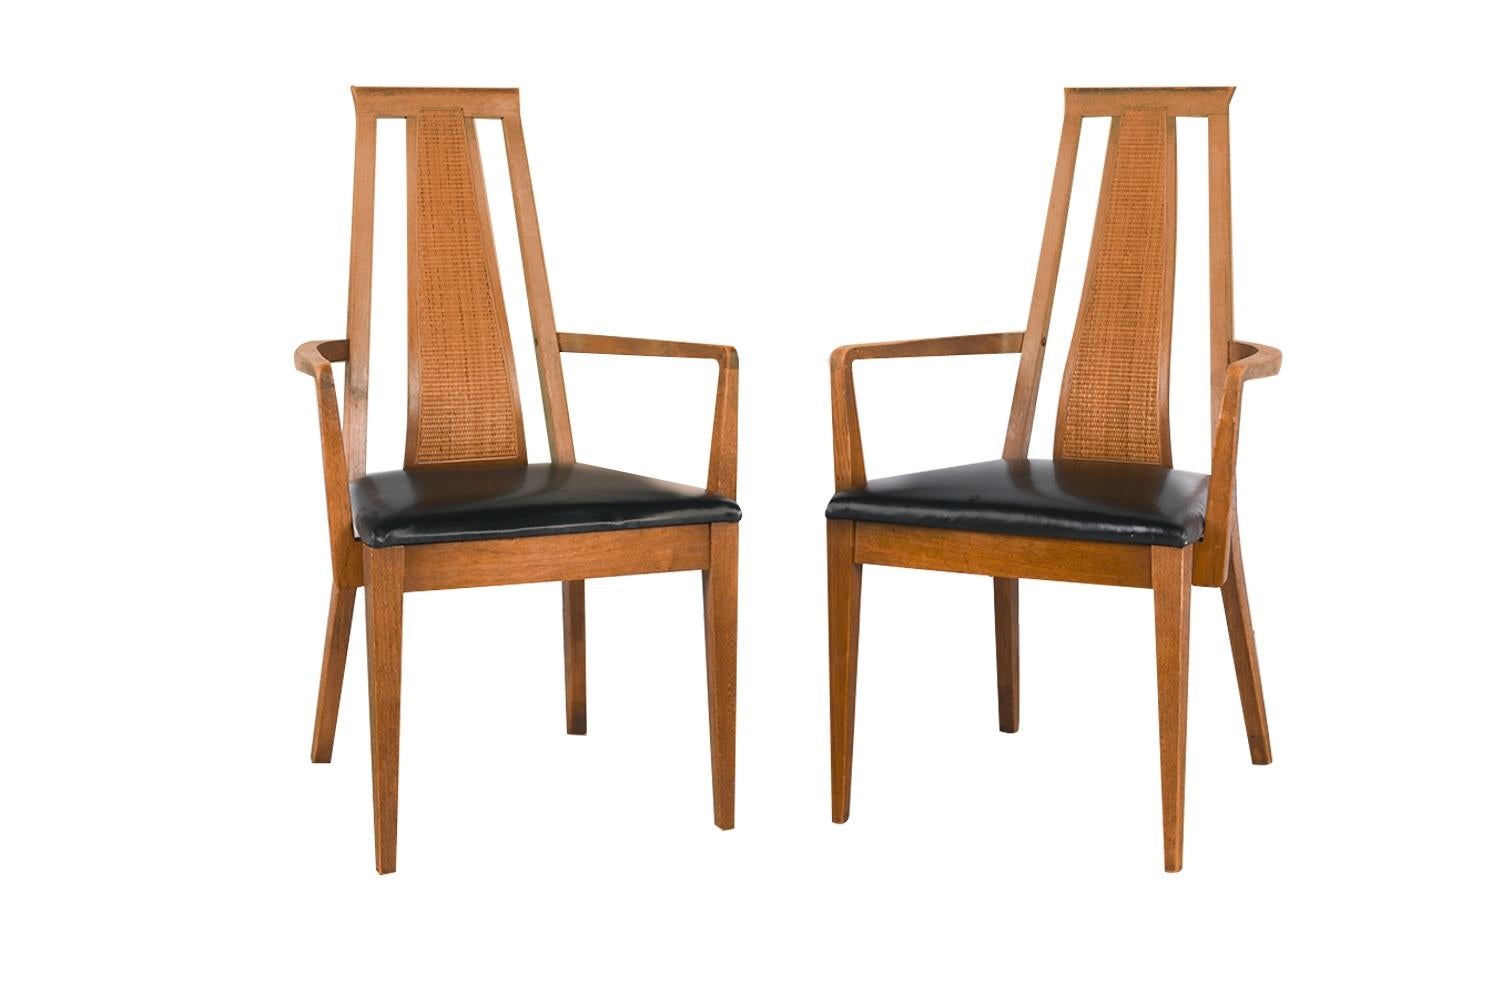 Stunning set of six beautiful Mid Century Modern Walnut dining chairs, two arm chairs and four side chairs by American of Martinsville. The solid walnut frames feature modern styling with a distinct beautiful design. Sculpturally carved caned high